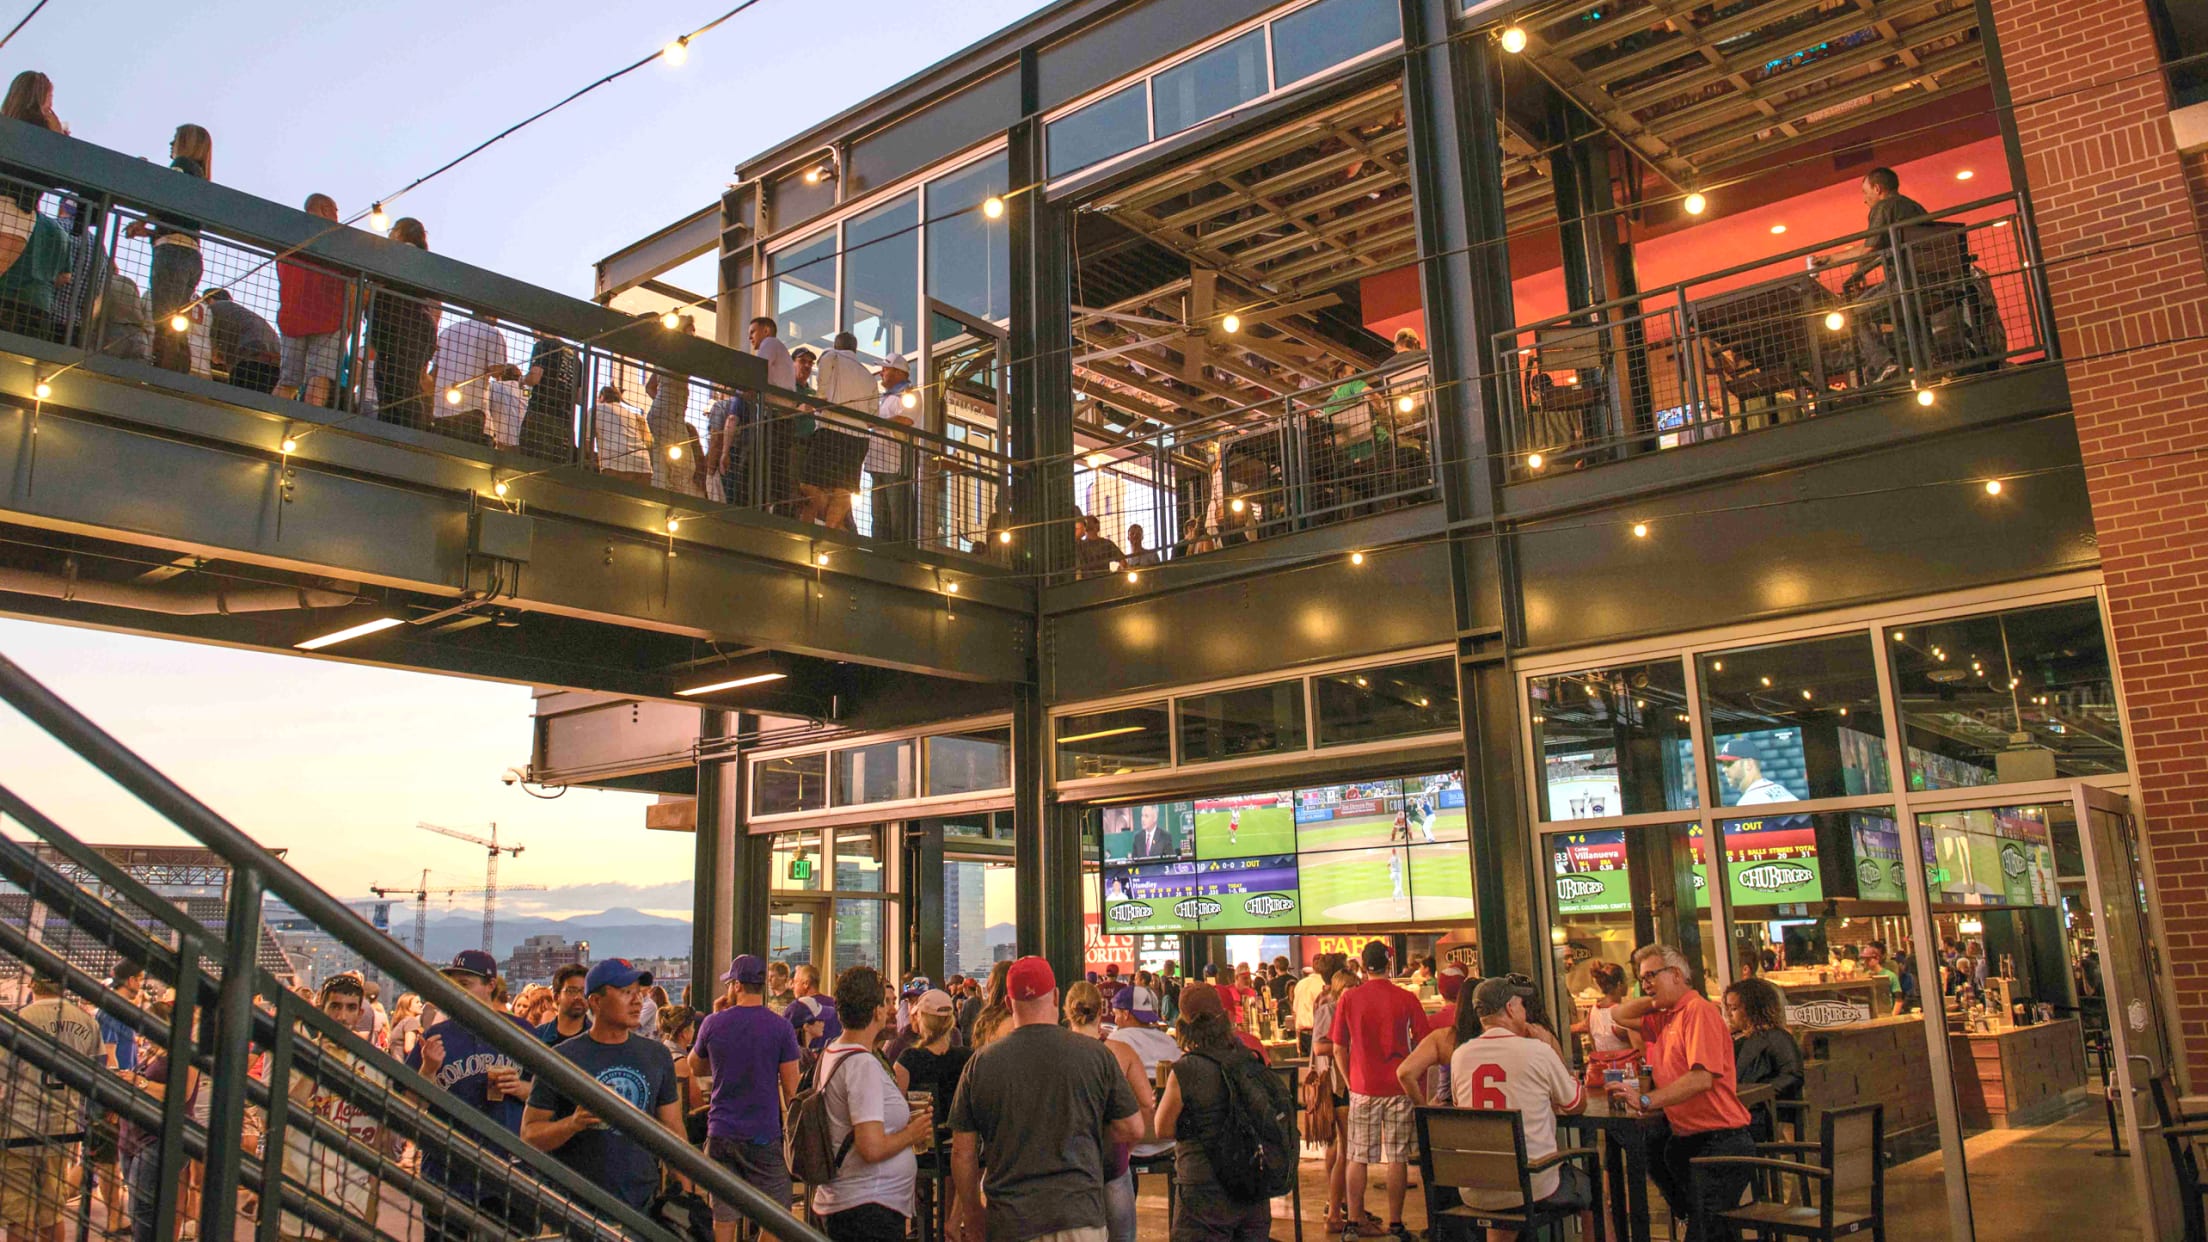 Rockies' Rooftop party deck at Coors Field “another dimension